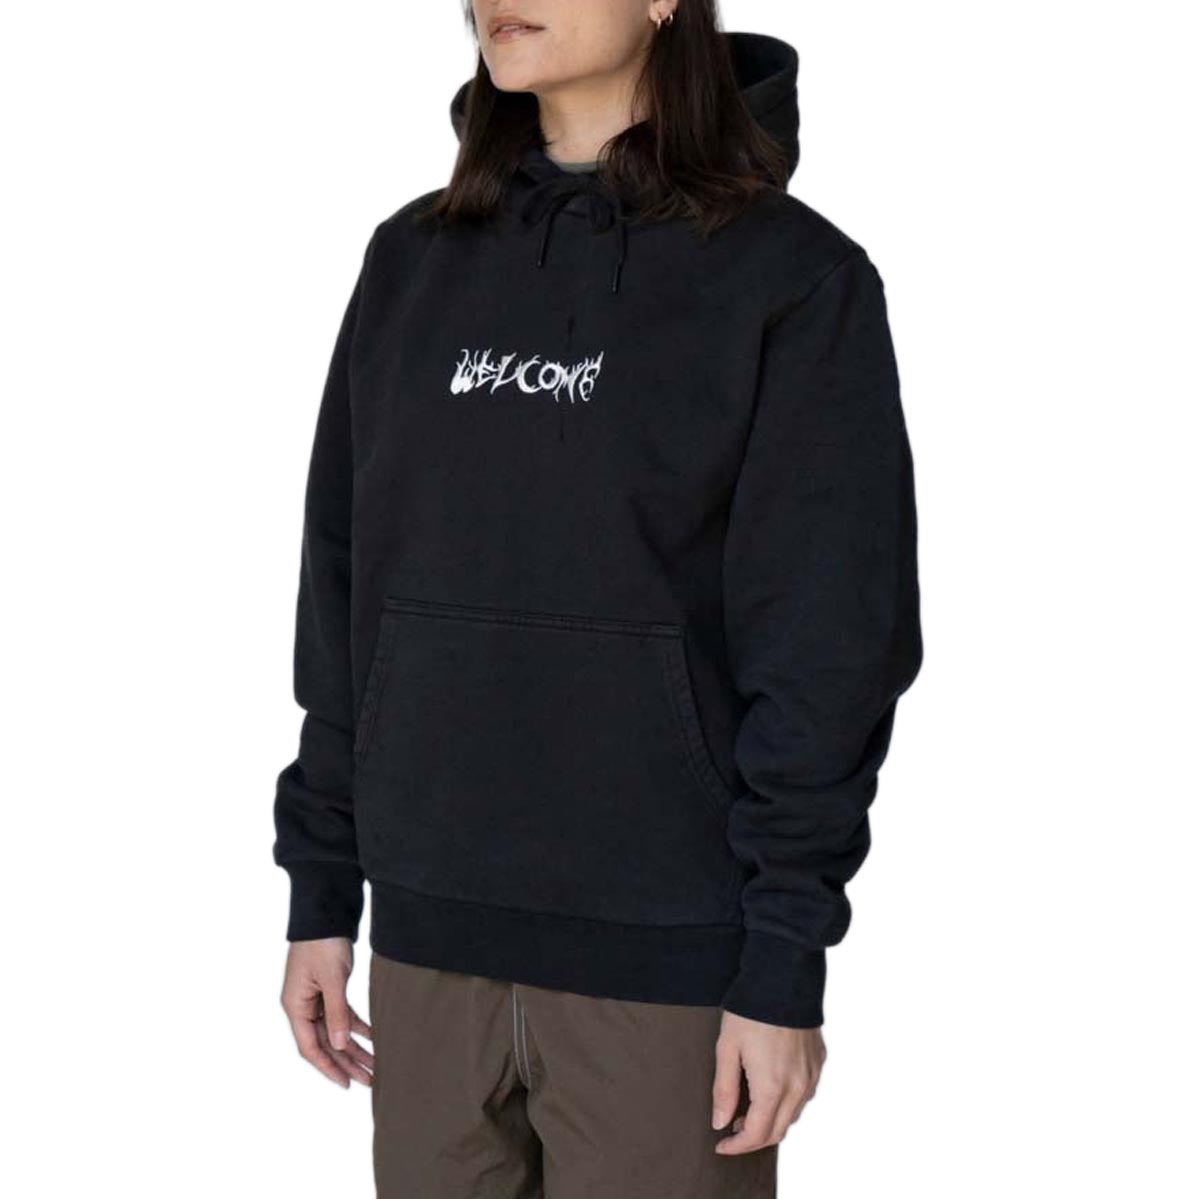 Welcome Light And Easy Patch Hoodie - Black image 5